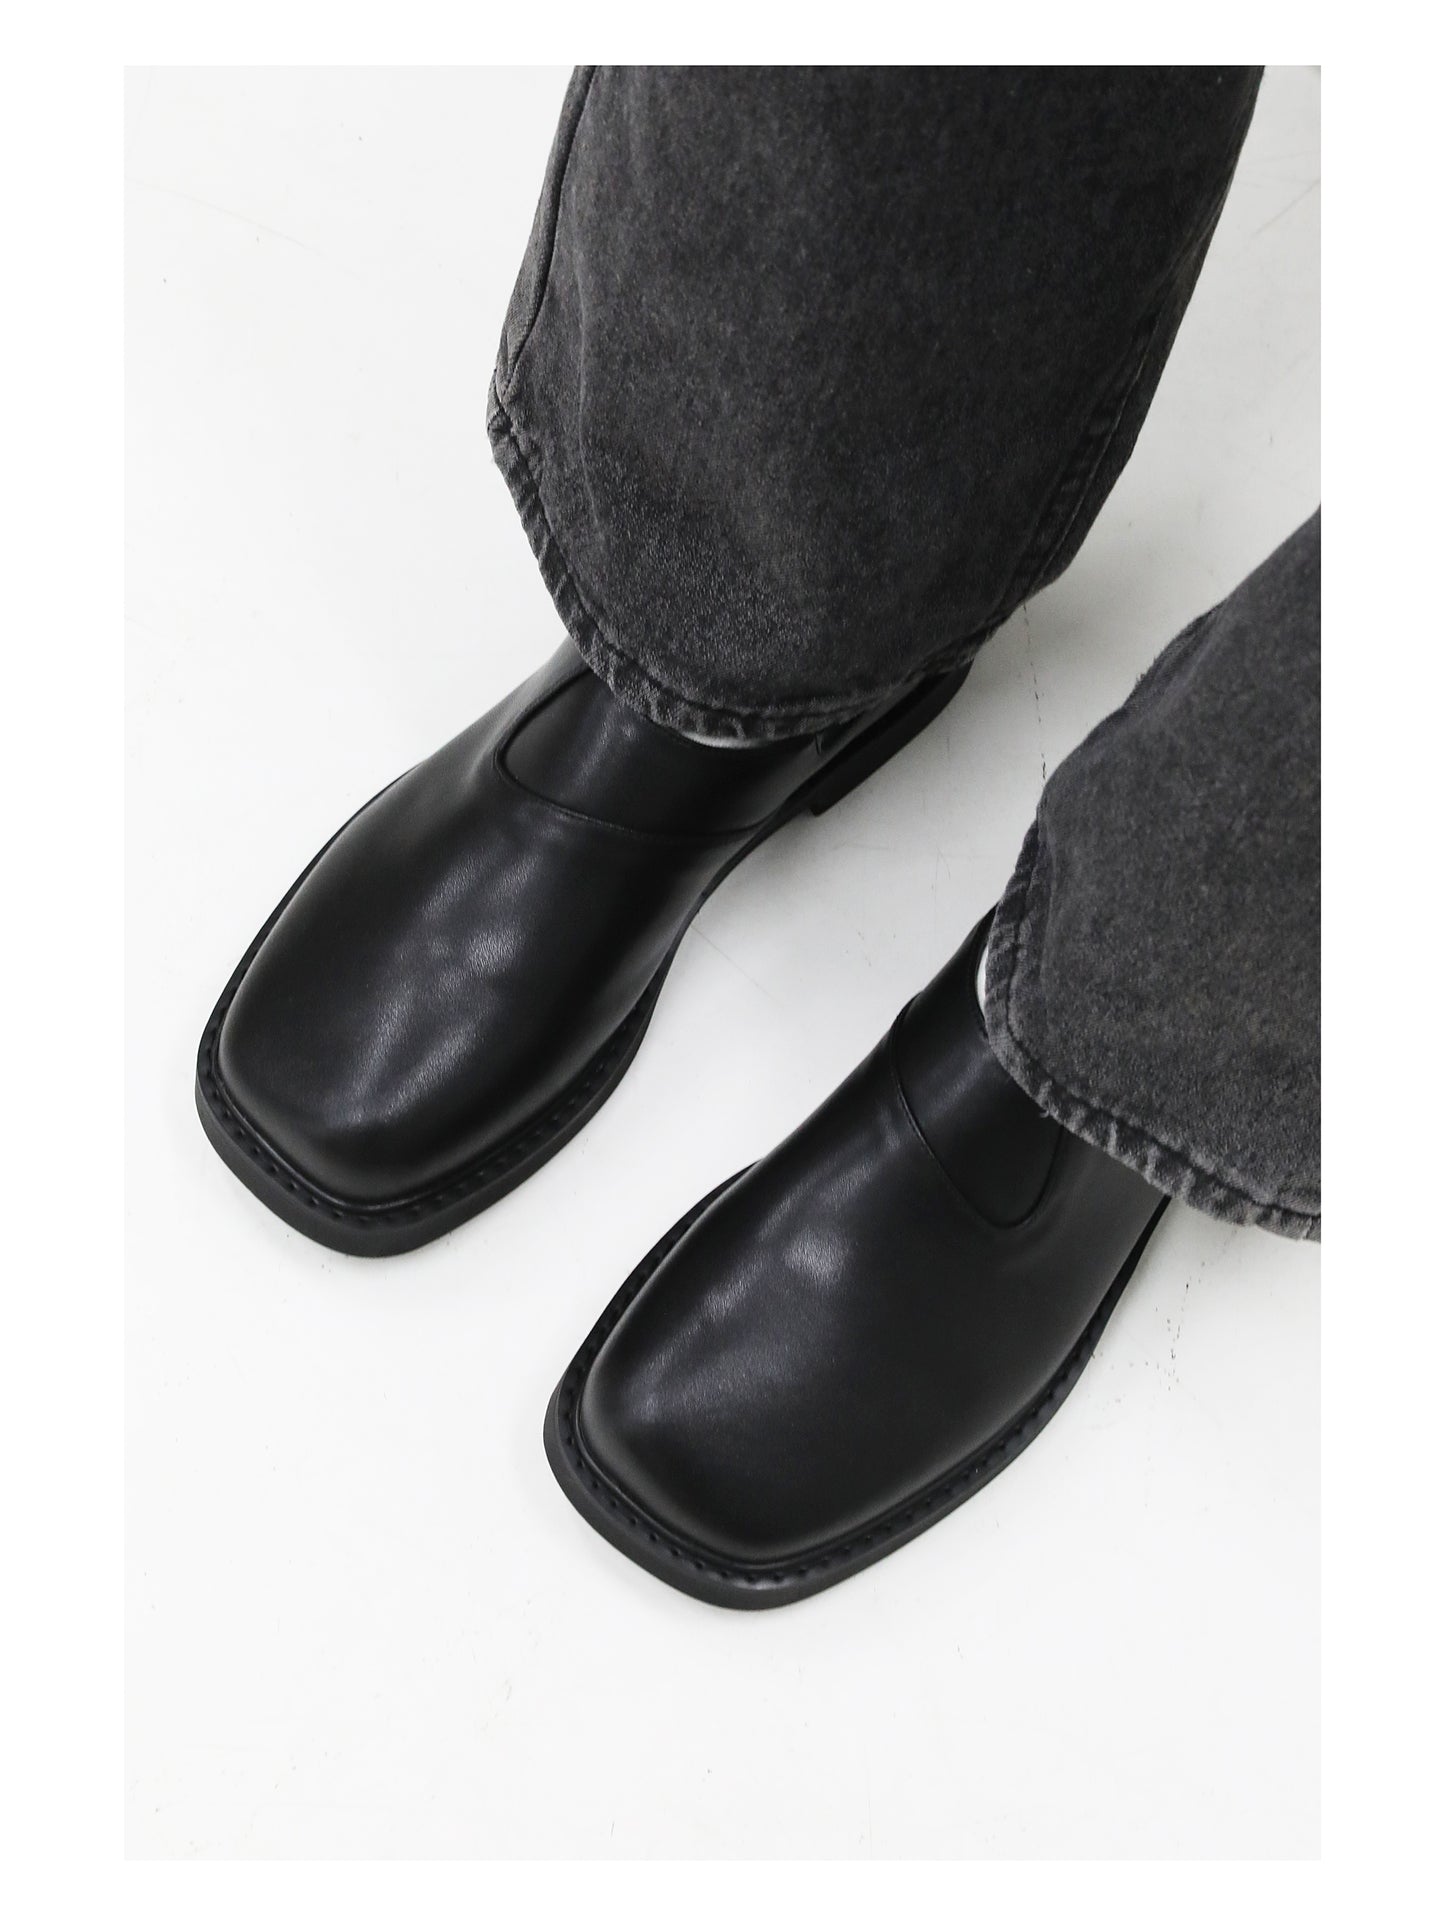 【New】New Rubber Leather Shoes